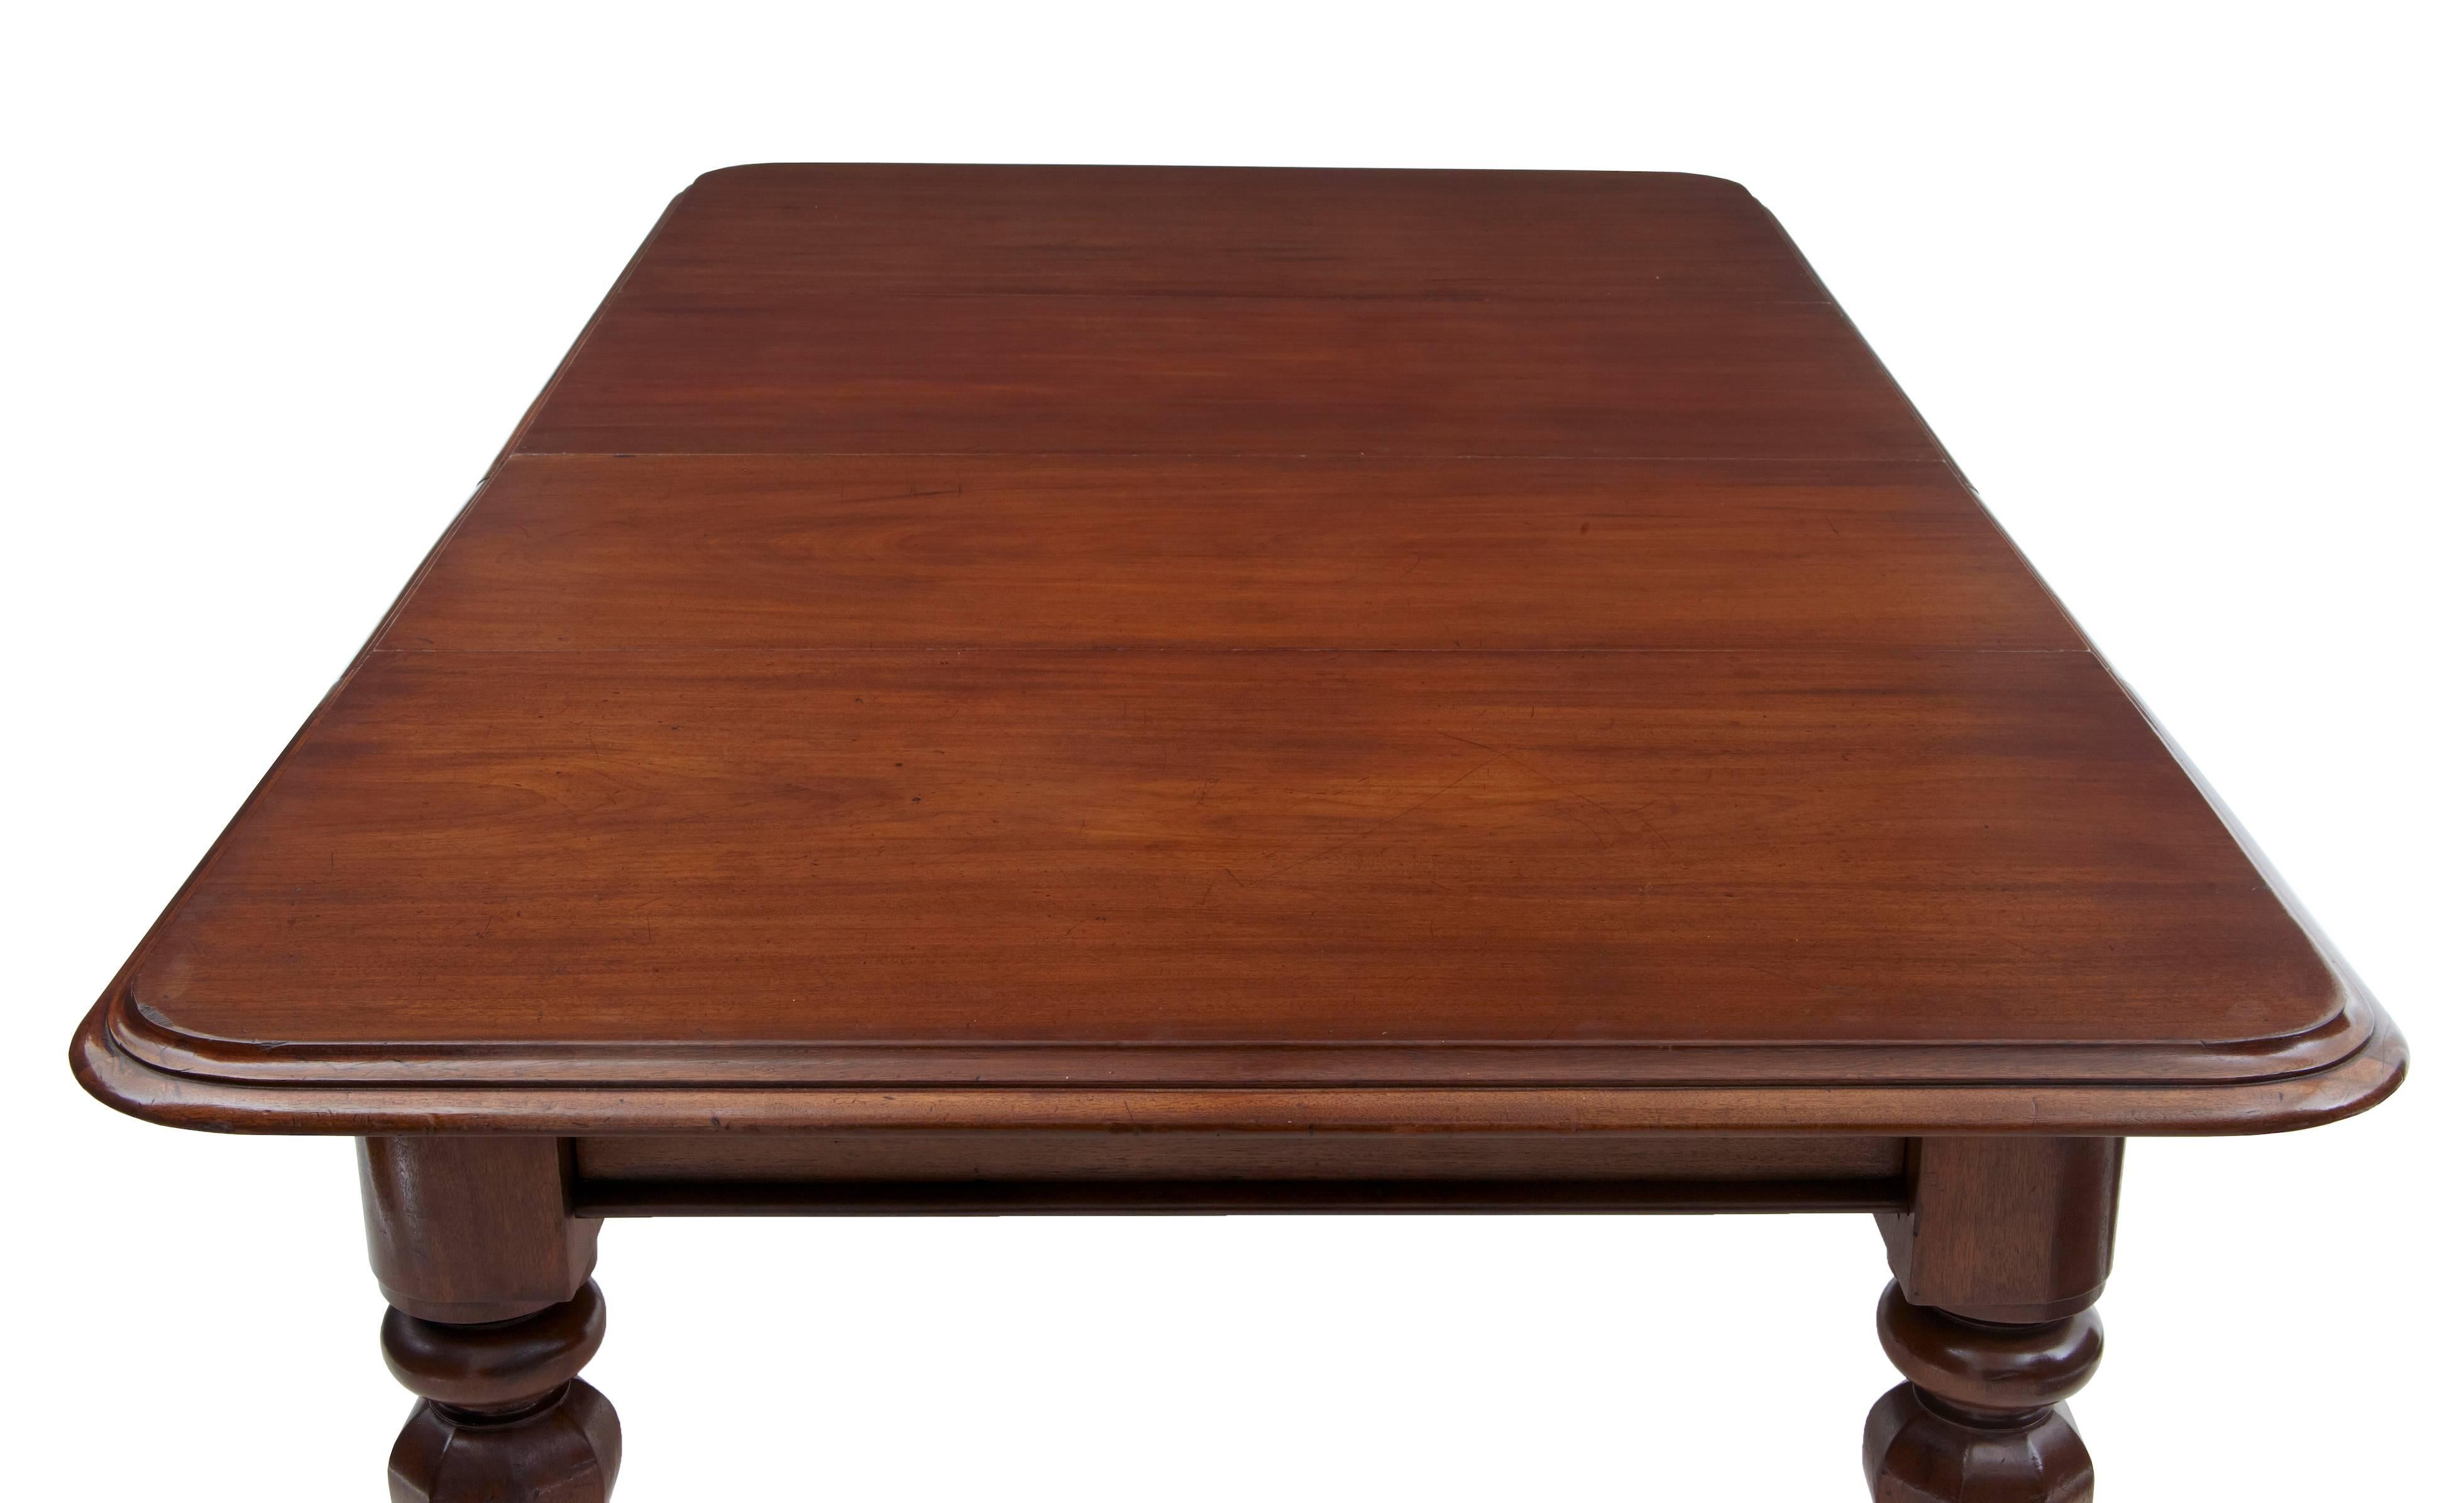 William IV solid mahogany extending dining table with two large original solid mahogany leaves, the top having a double moulded edge, pull-out mechanism, standing on four shaped octagonal mahogany legs with original brass castors
History of the